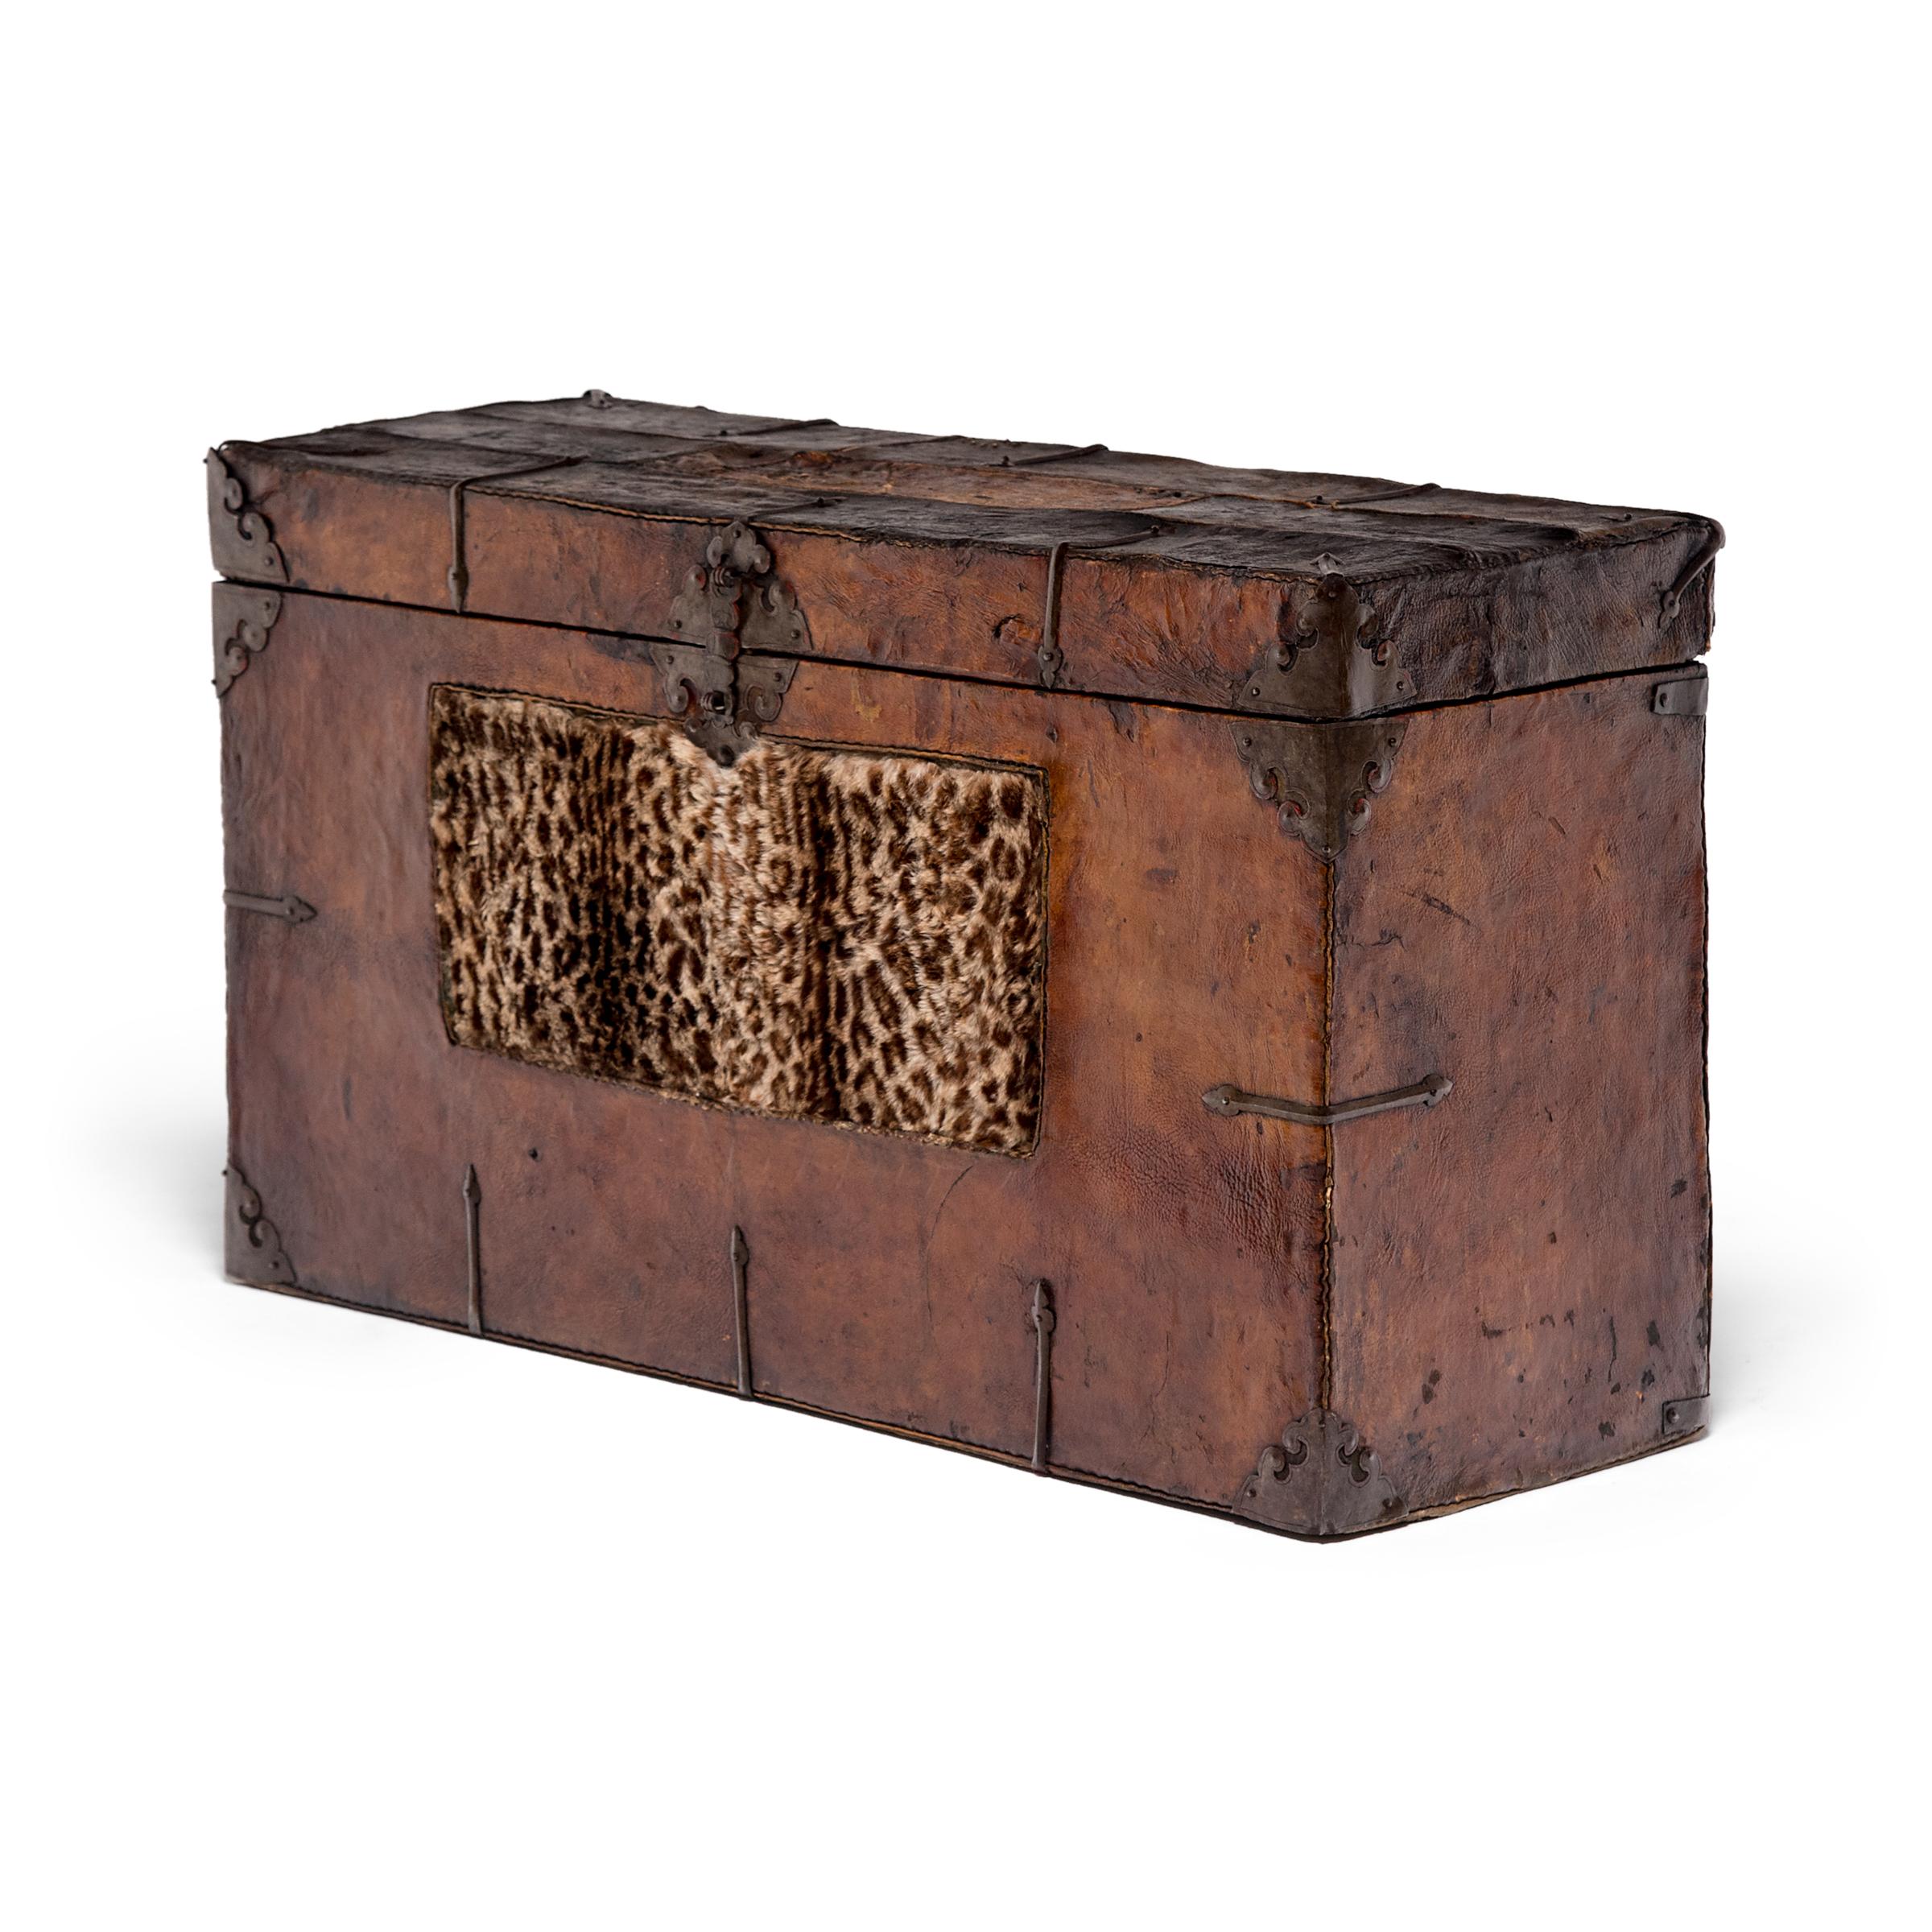 Made of humble pine, this gorgeous Tibetan trunk nevertheless impresses with perfect proportions and a timeless, minimal design. The trunk dates to the late 19th century, a period that saw a distinctive style of medium-sized chests finished with